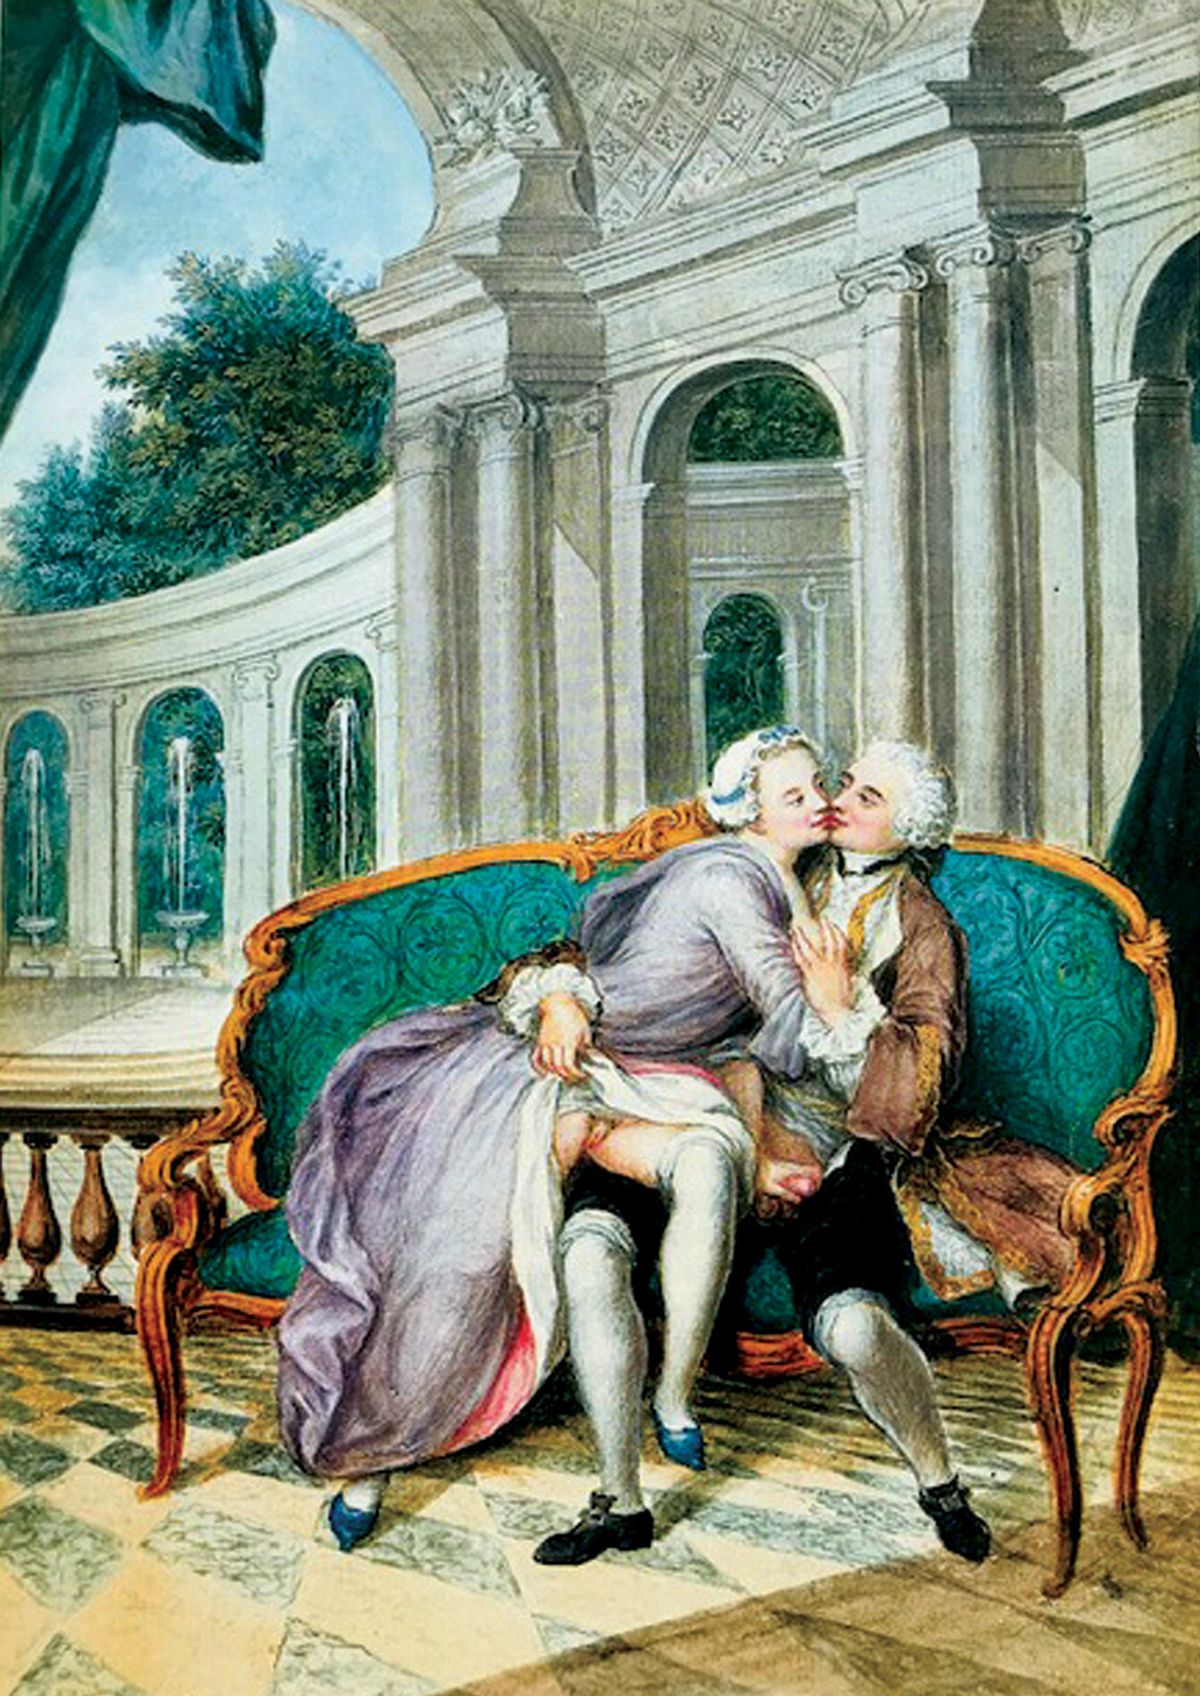 Vintage French Erotic Art - Review | Not quite 50 shades of gris: new book on 18th-century French art  reveals discrete gradations of erotic images | L'amour peintre: l'imagerie  Ã©rotique en France au XVIIIe siÃ¨cle